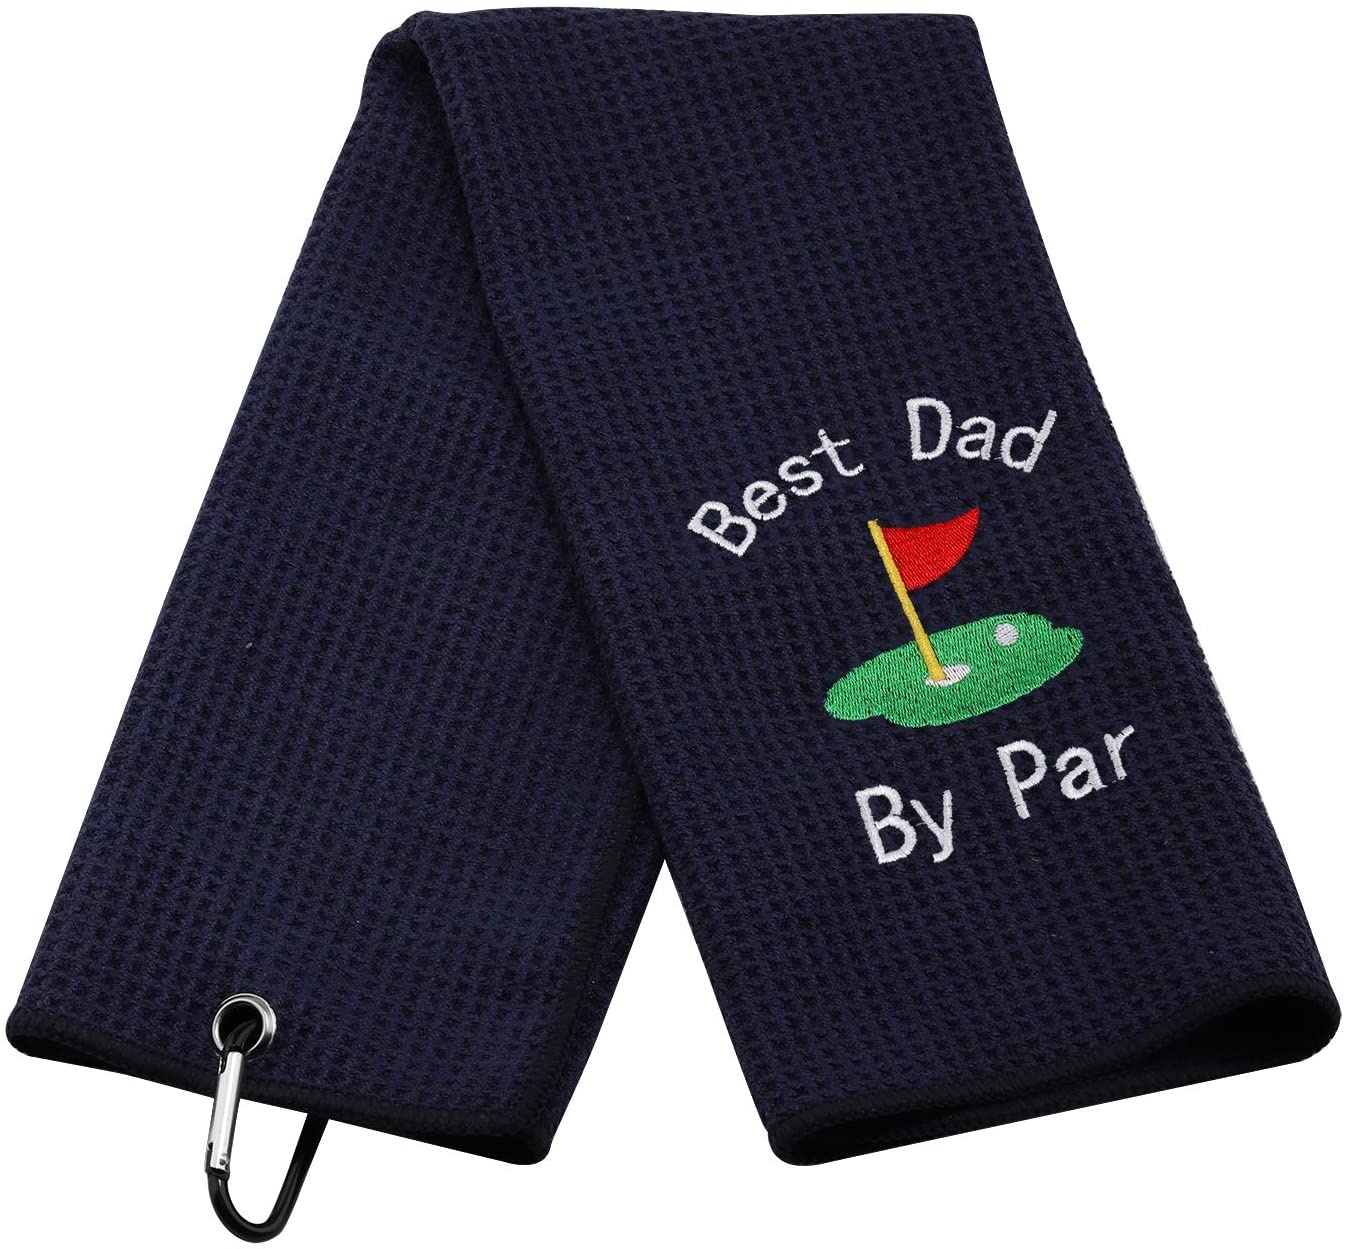 golf towel with embroidery LOGO